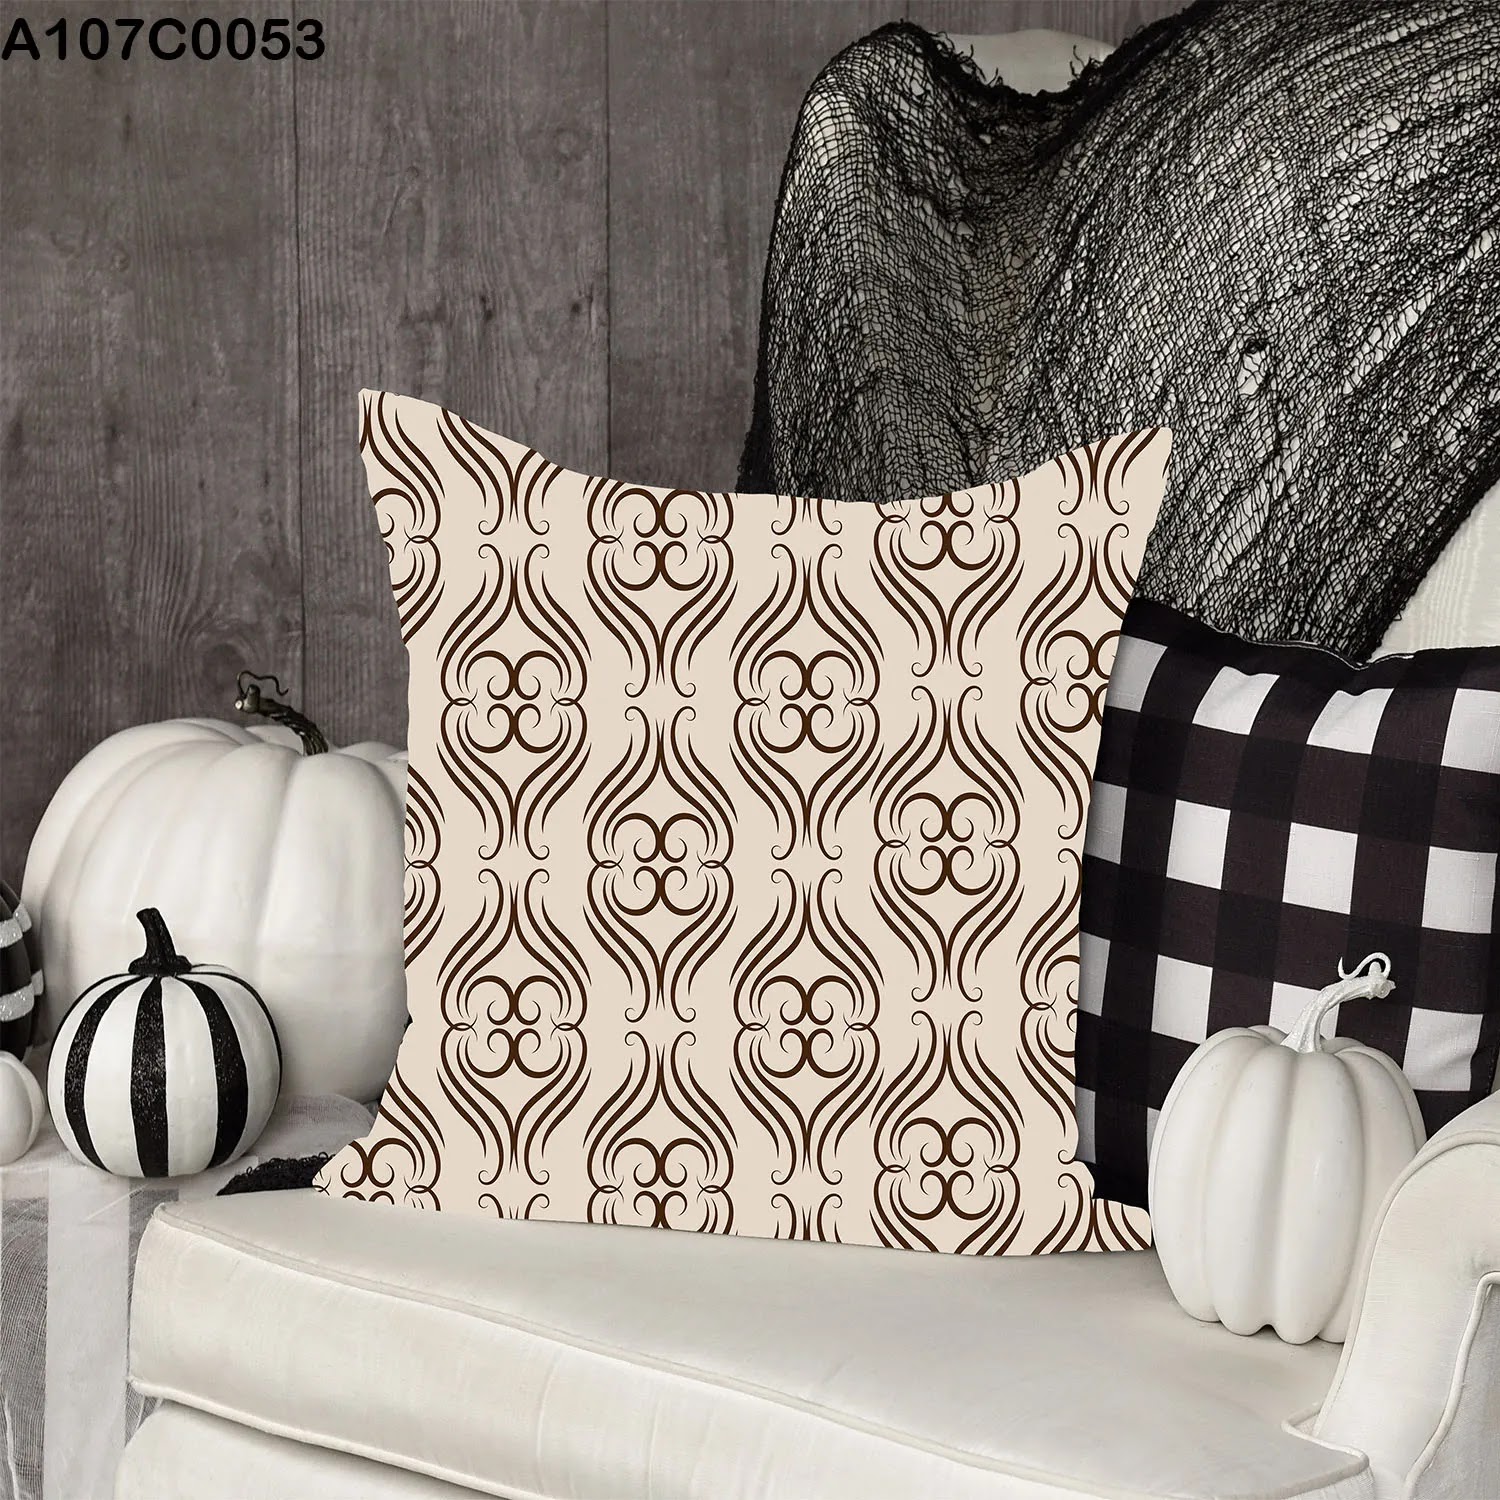 Beige pillow case with brown drawings